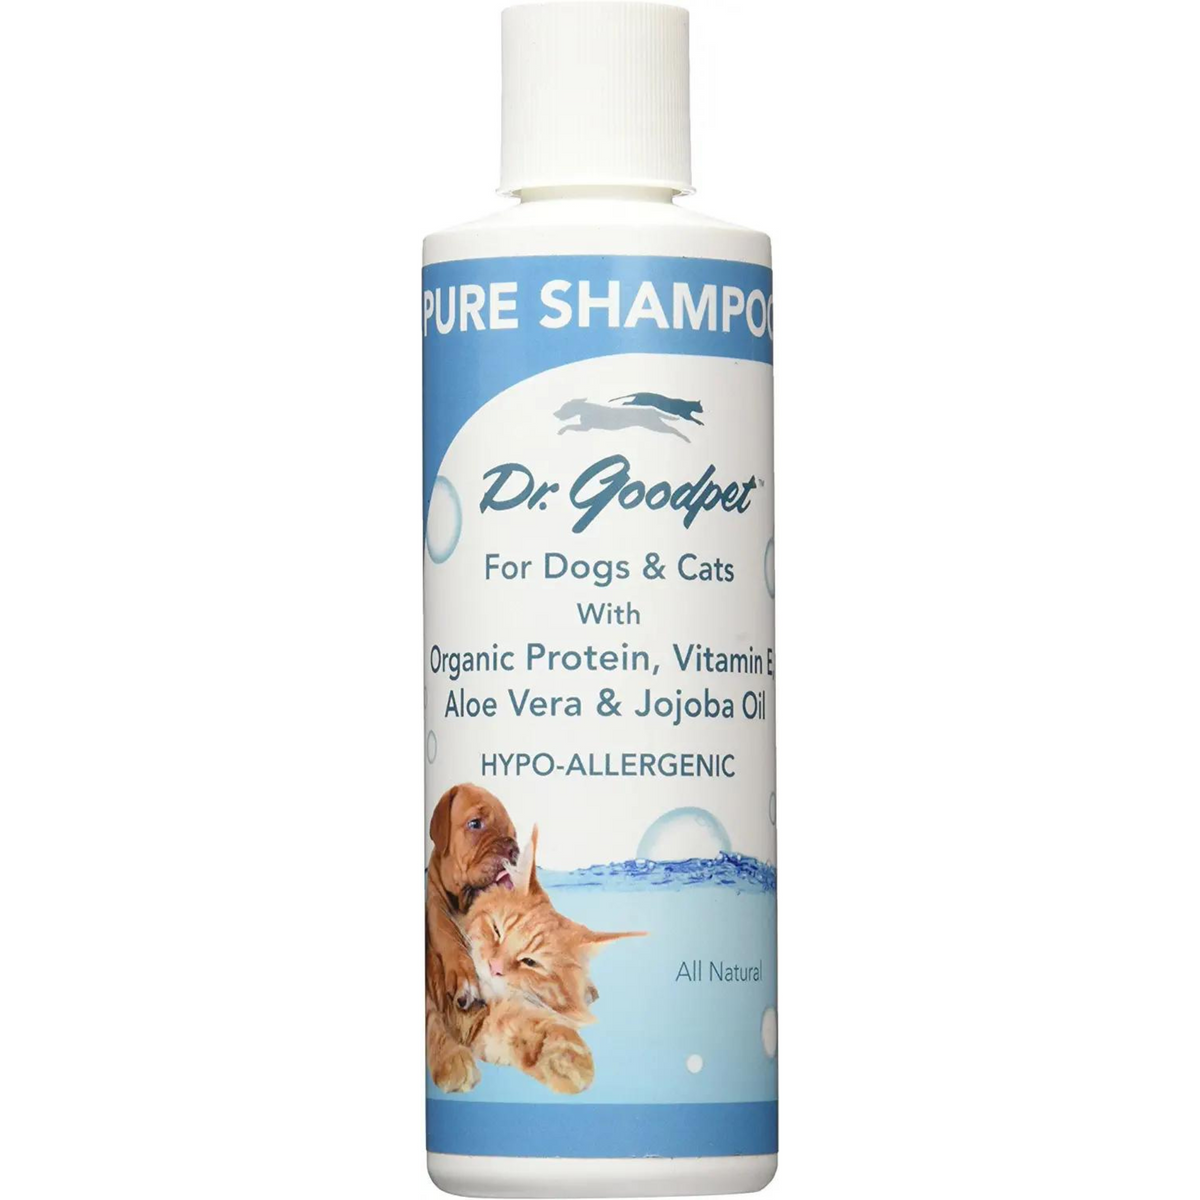 Primary Image of Pure Shampoo for Dogs + Cats